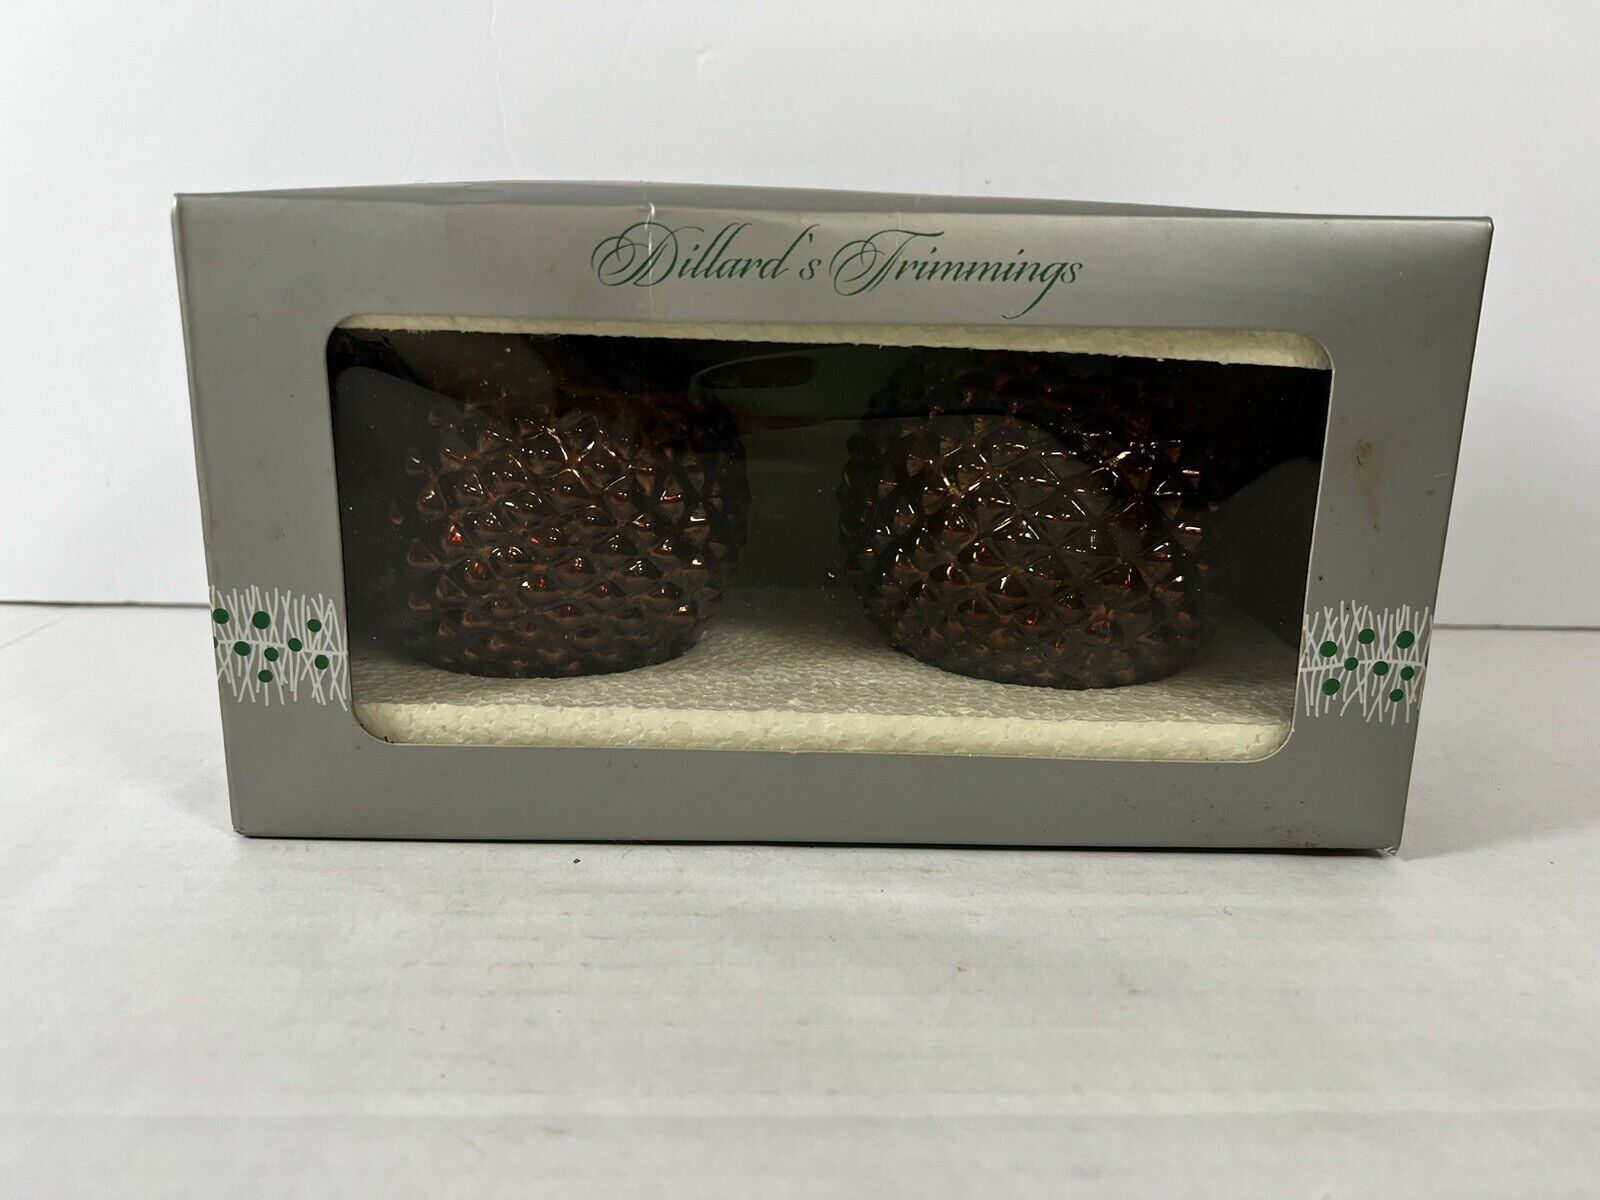 DILLARDS Trimmings 2 PC Pine Cone Inspired Christmas Ornaments-NEW w/Open Box